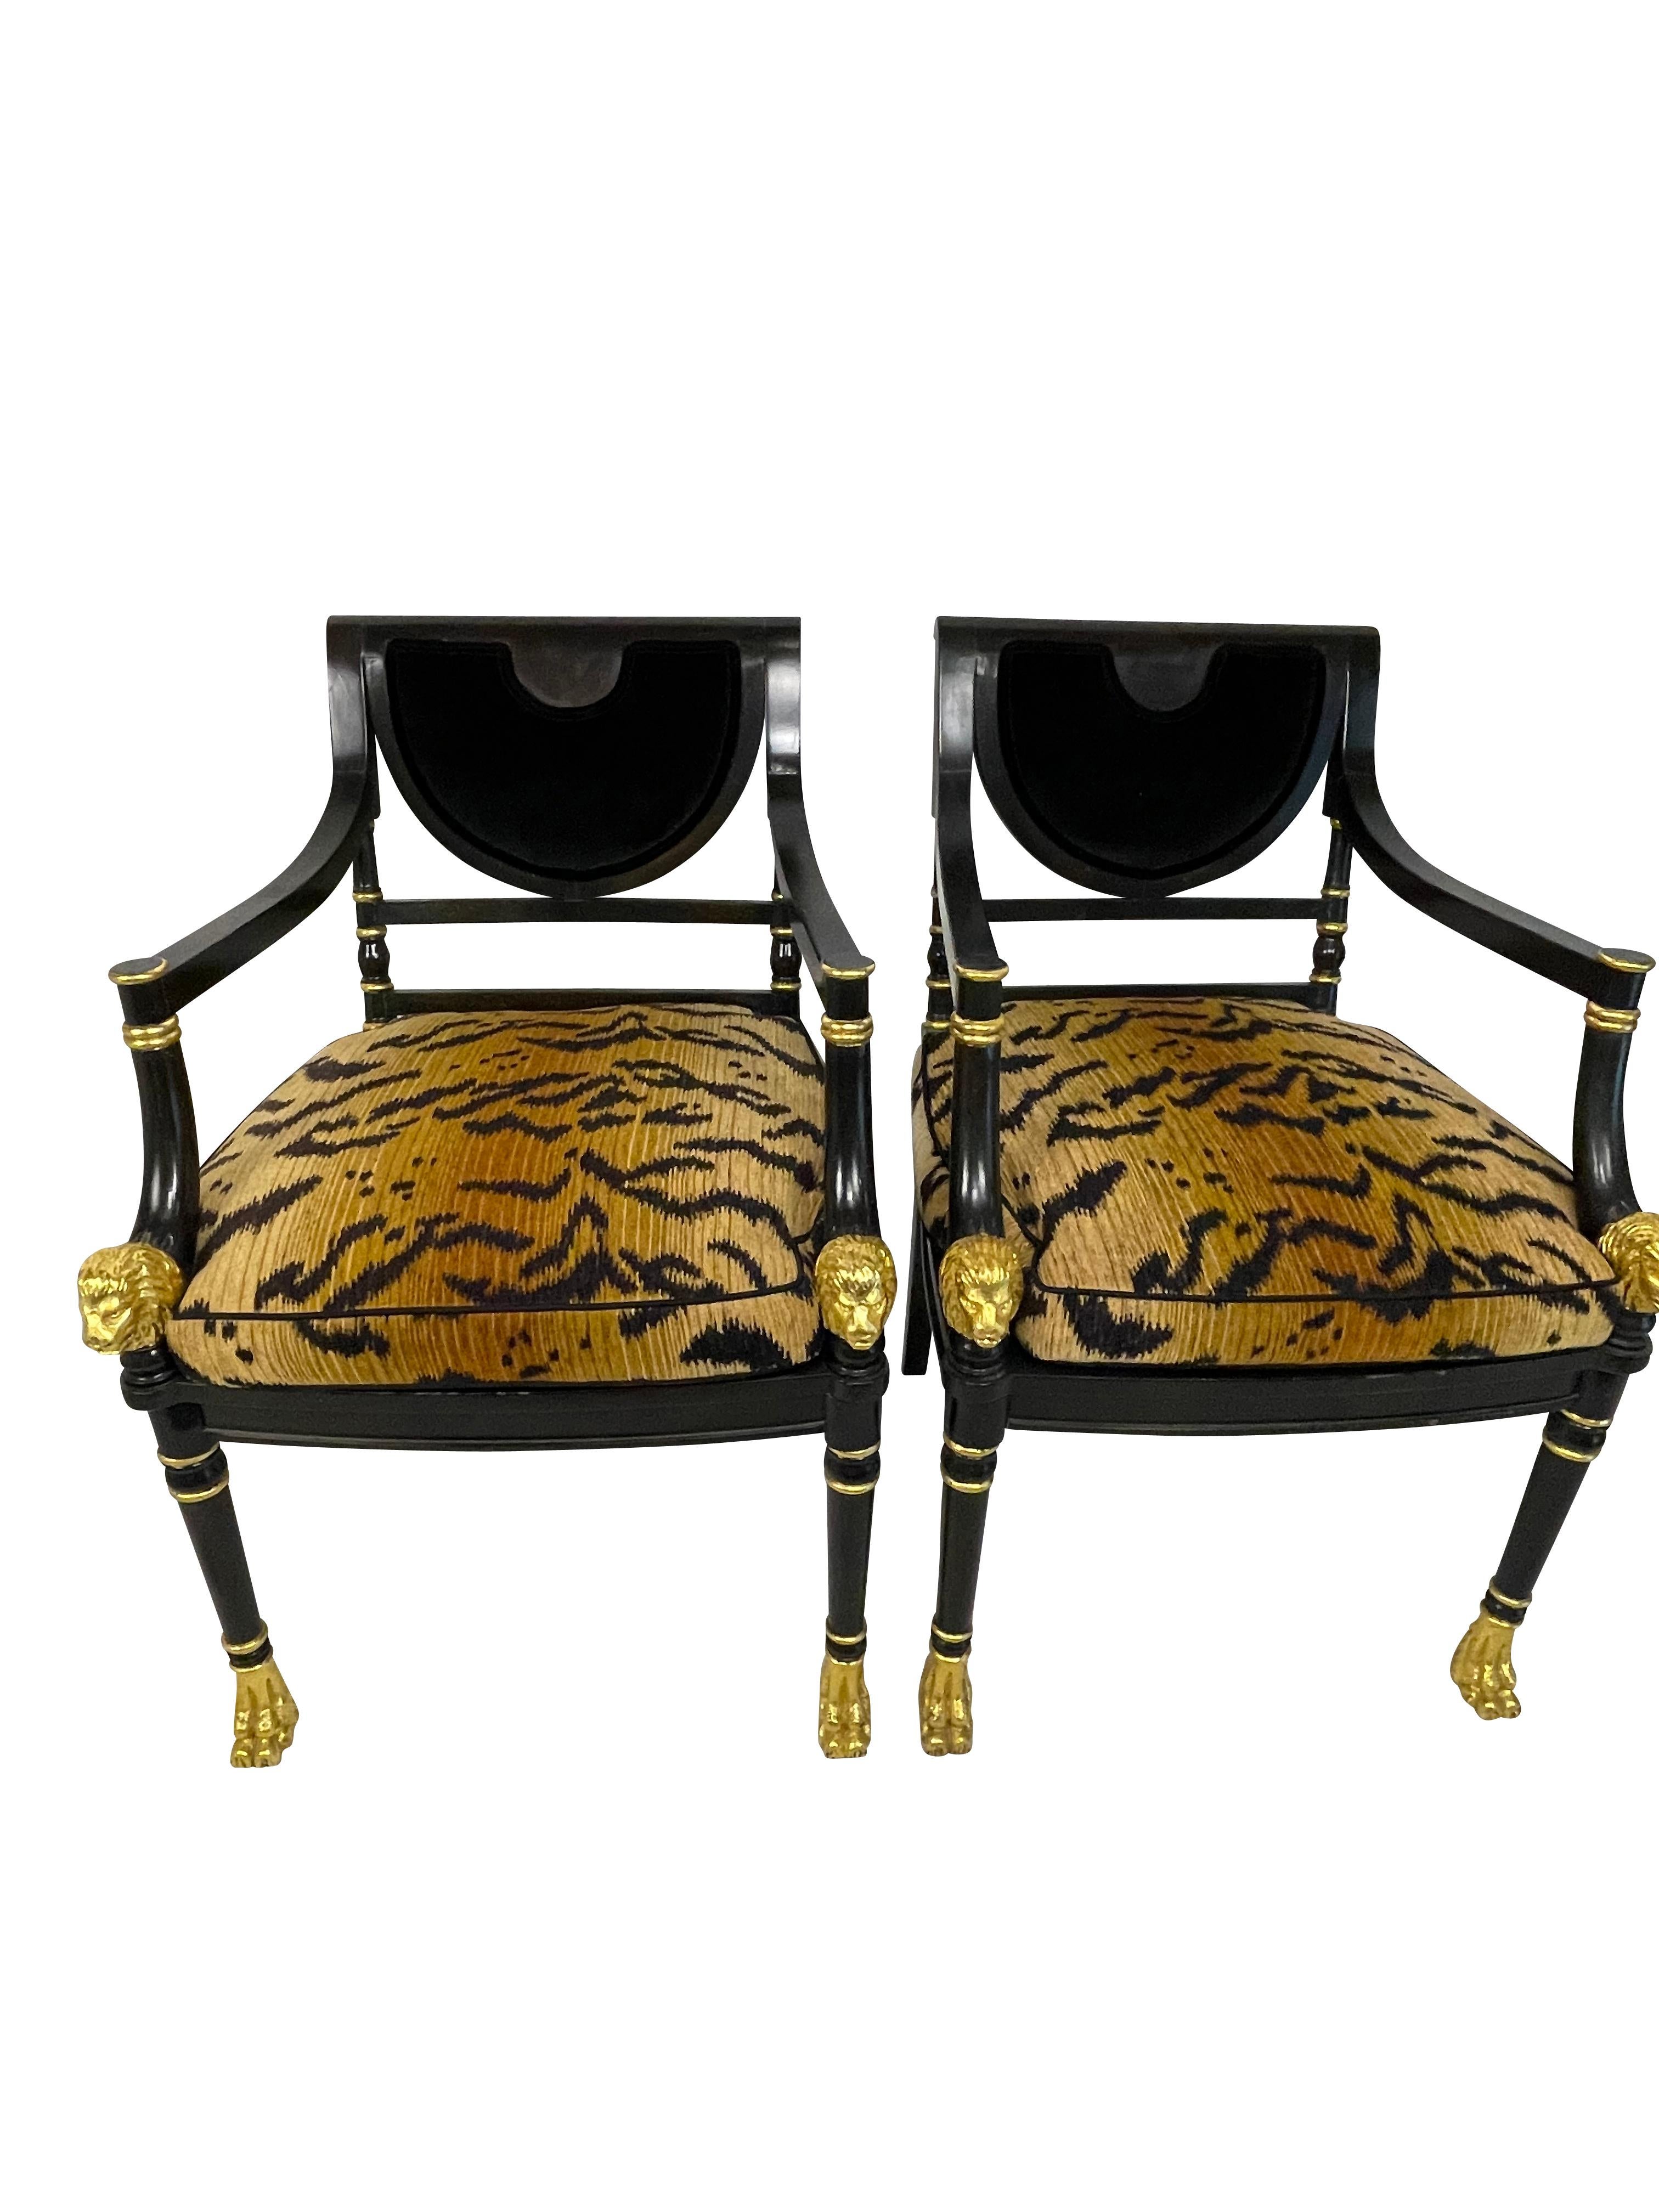 Two carved Regency style ebonized and gilt decorated chairs with carved gilt lion heads and feet, animal print fabric cushions over cane seats, and velvet backs. 35.75